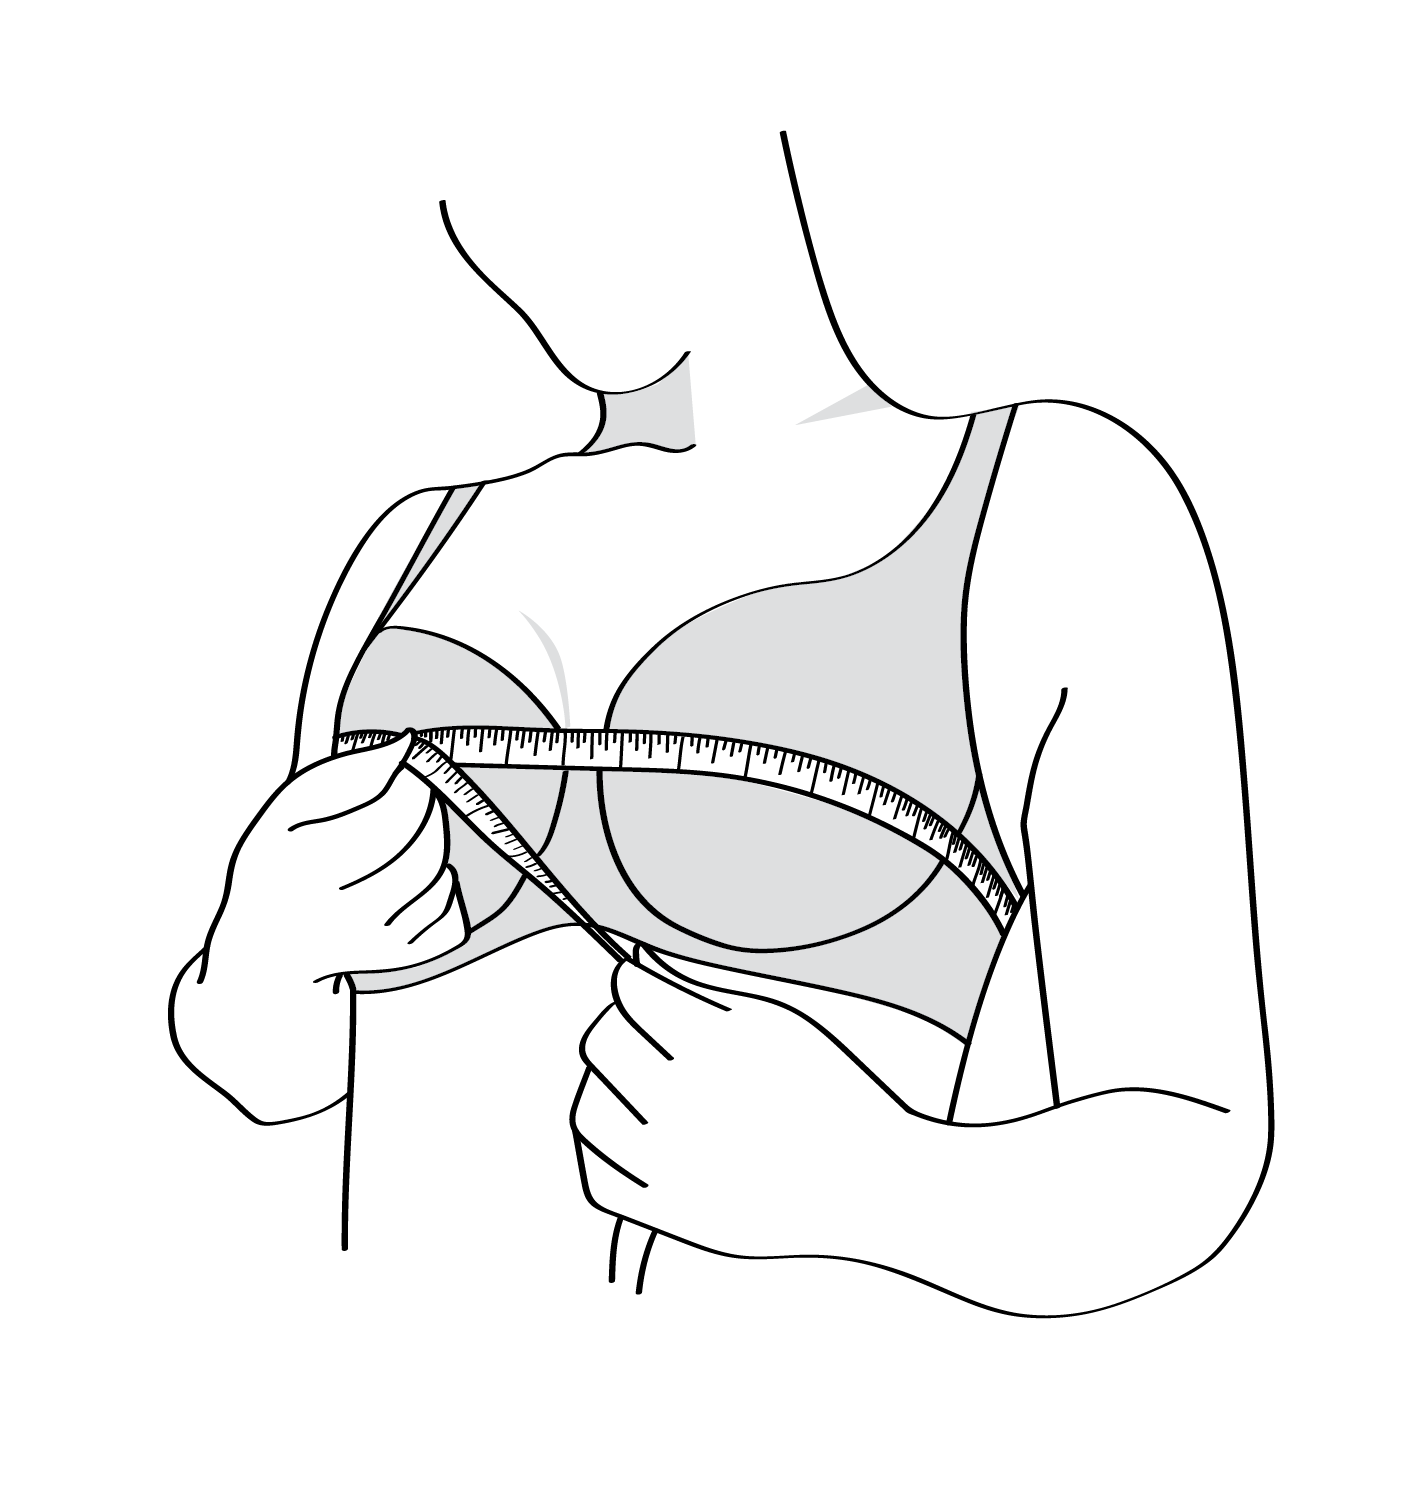 Bra Calculator Measuring Guide for finding your best bra fit